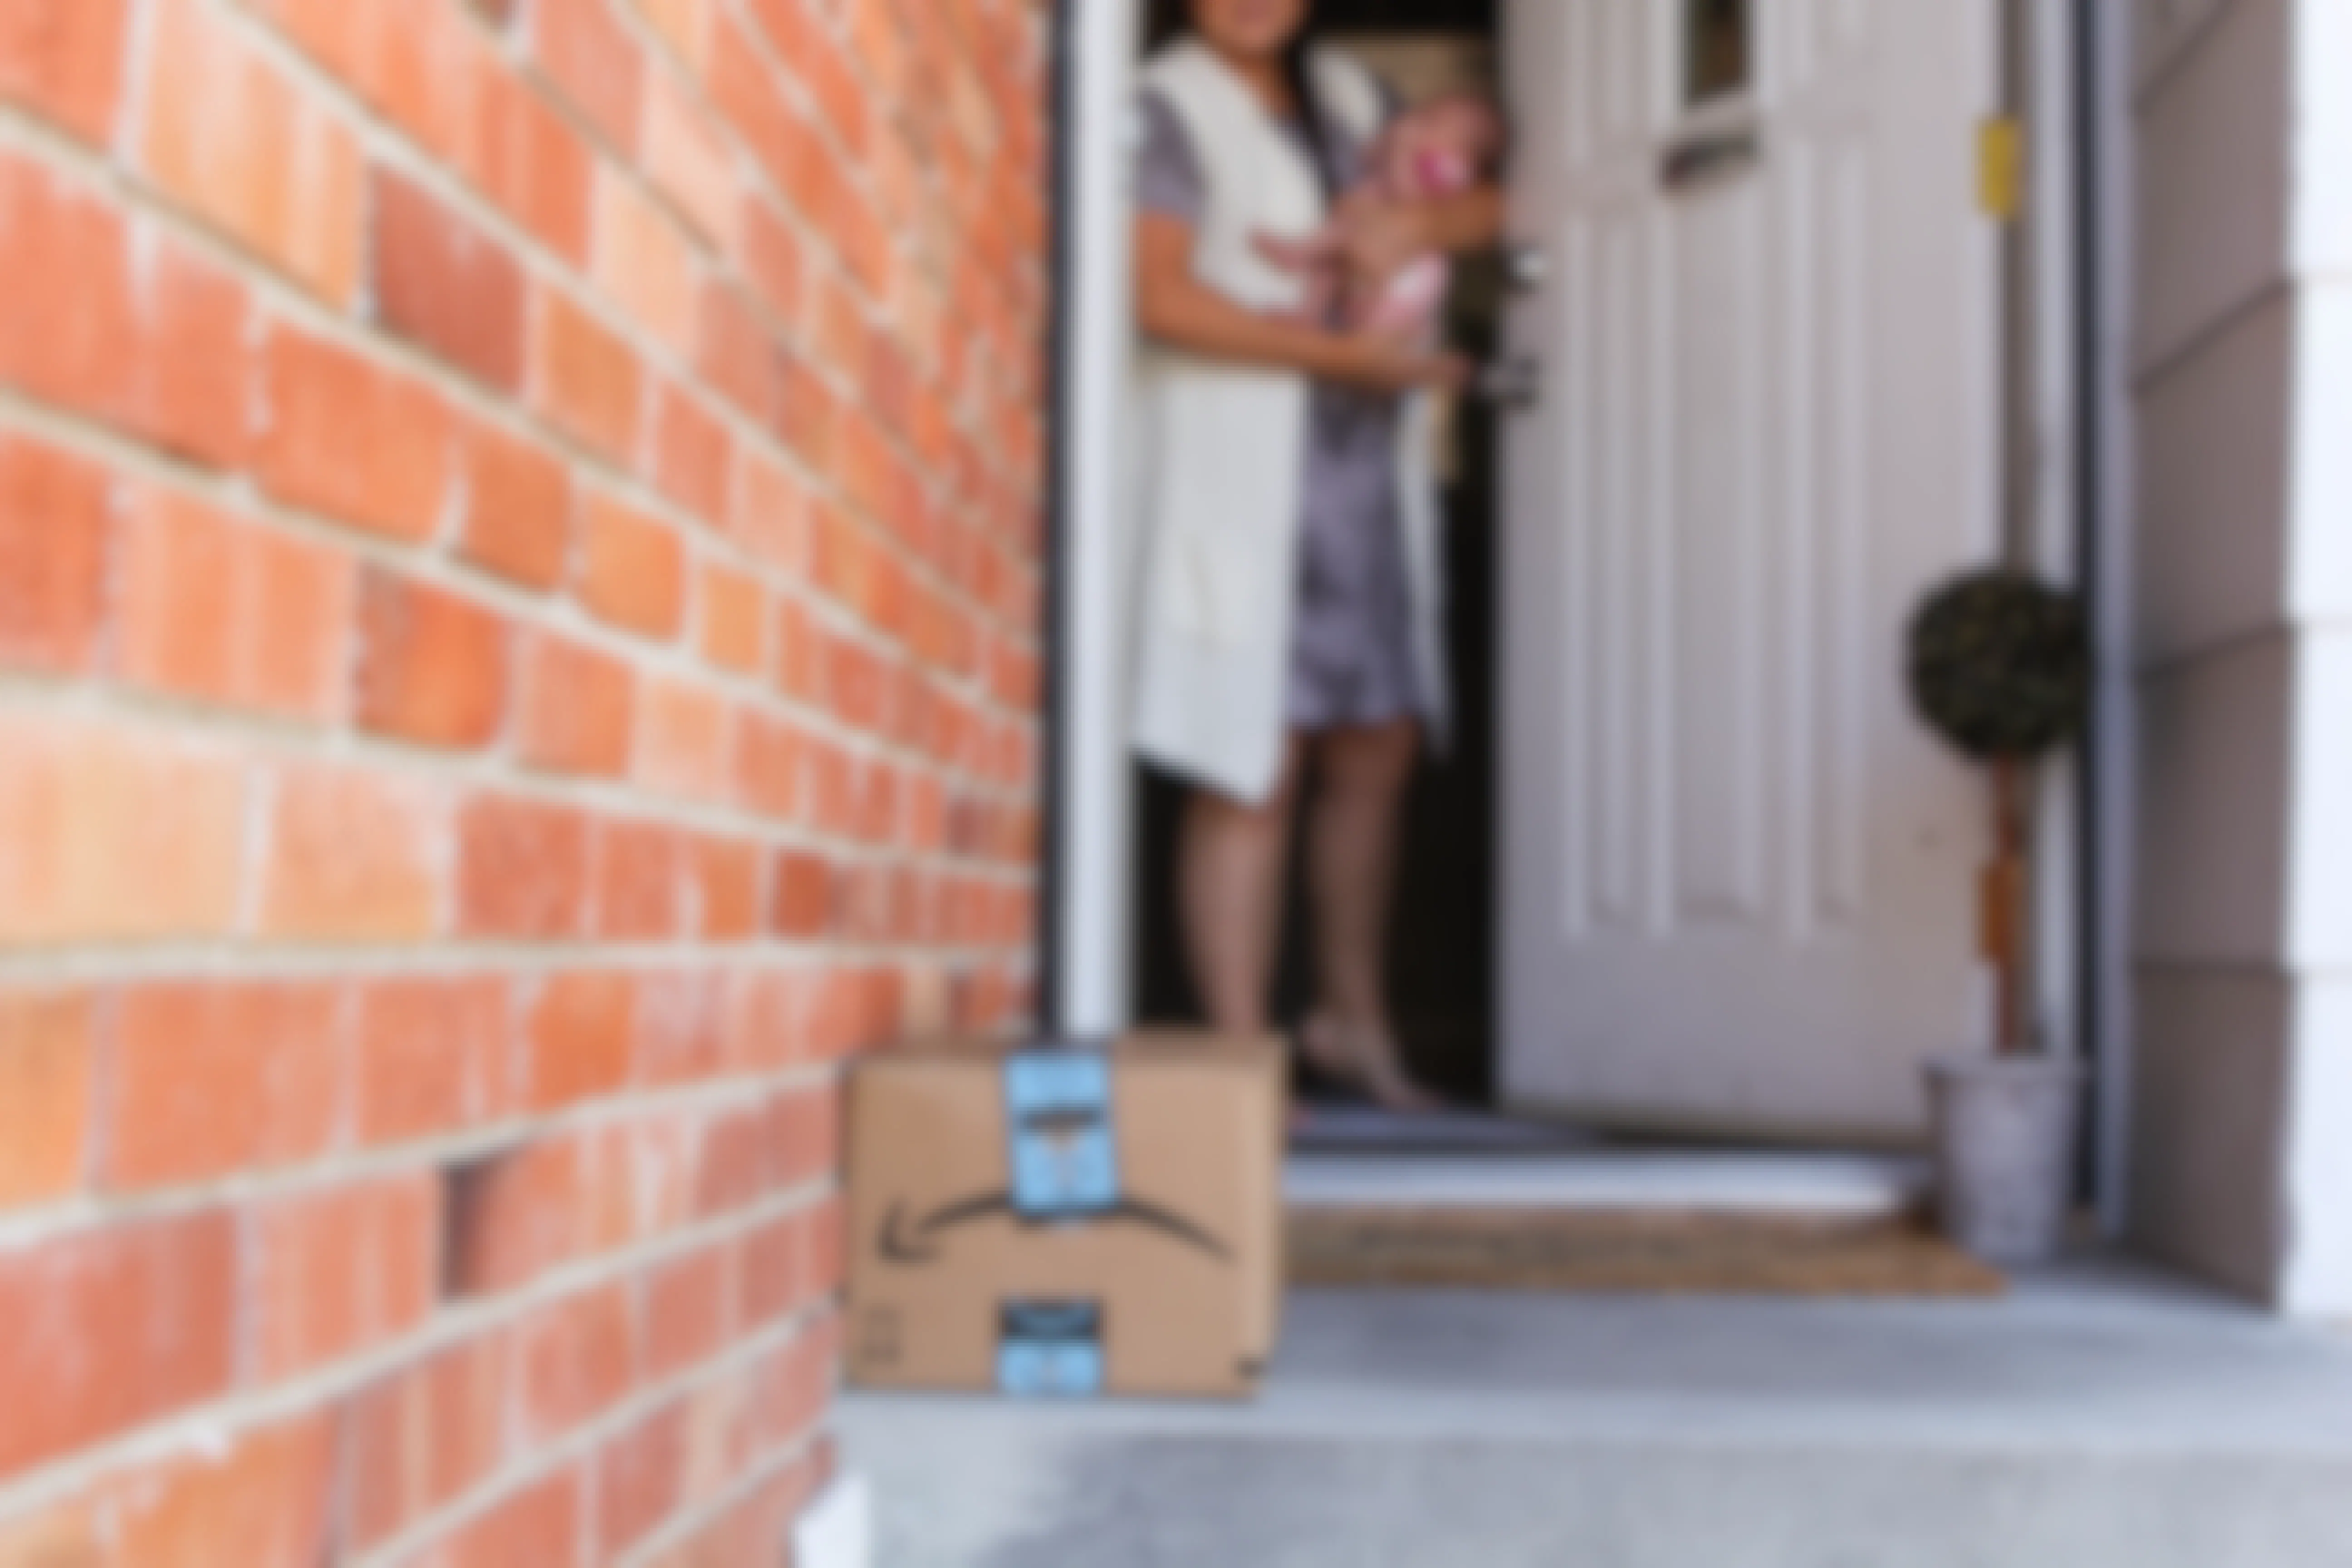 A mother holding her baby, opening the front door and looking down at an Amazon package sitting on her front porch.